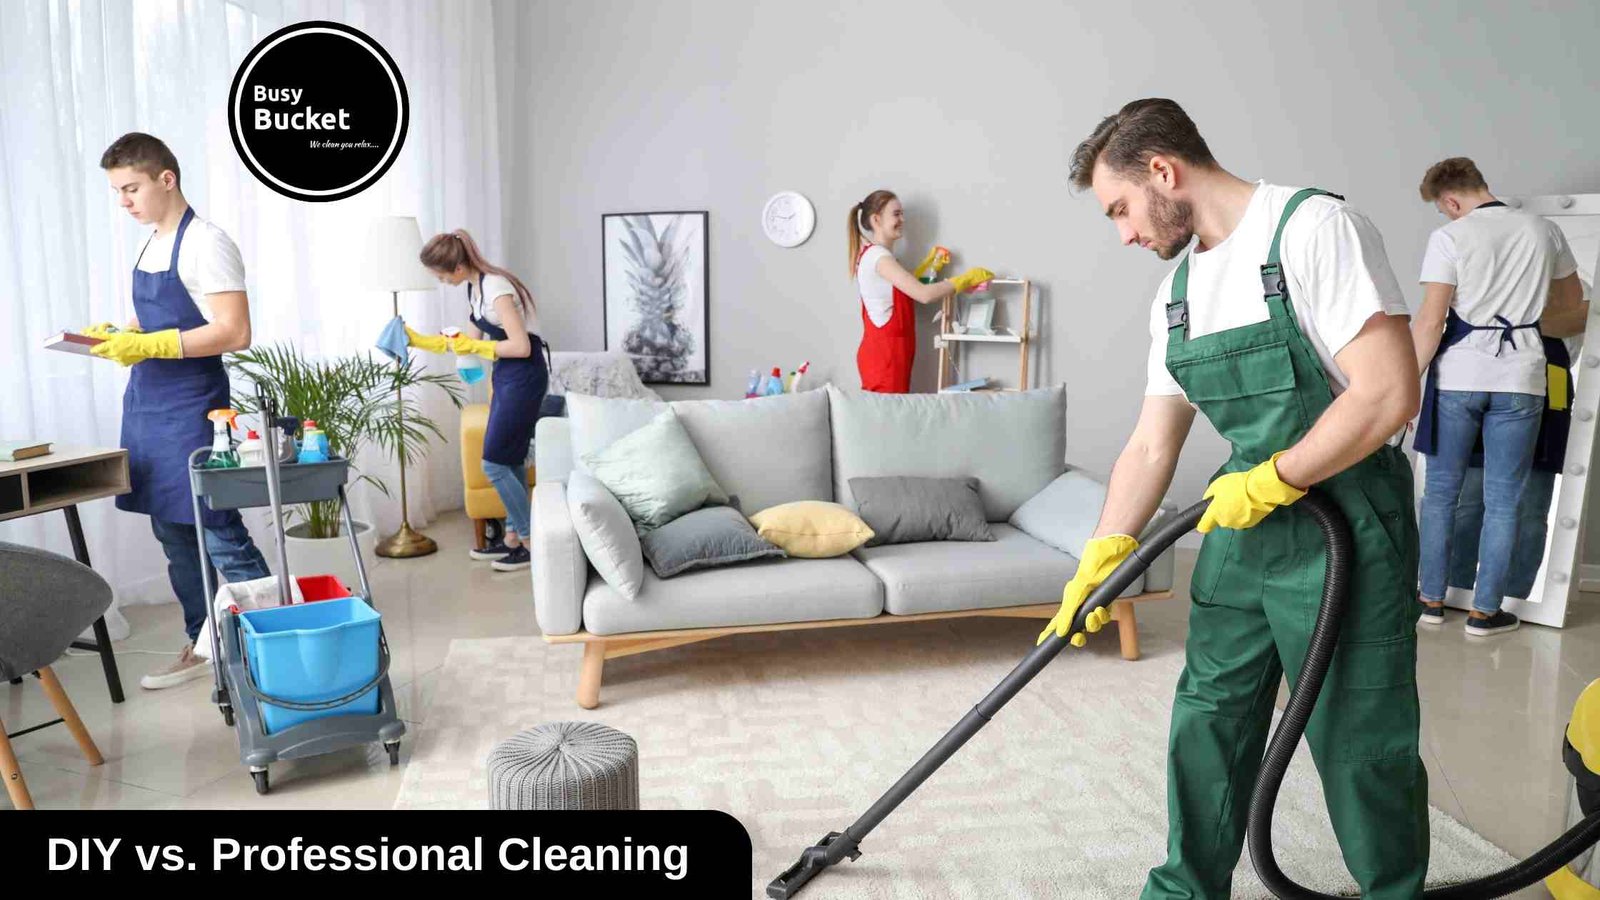 DIY vs. Professional Cleaning